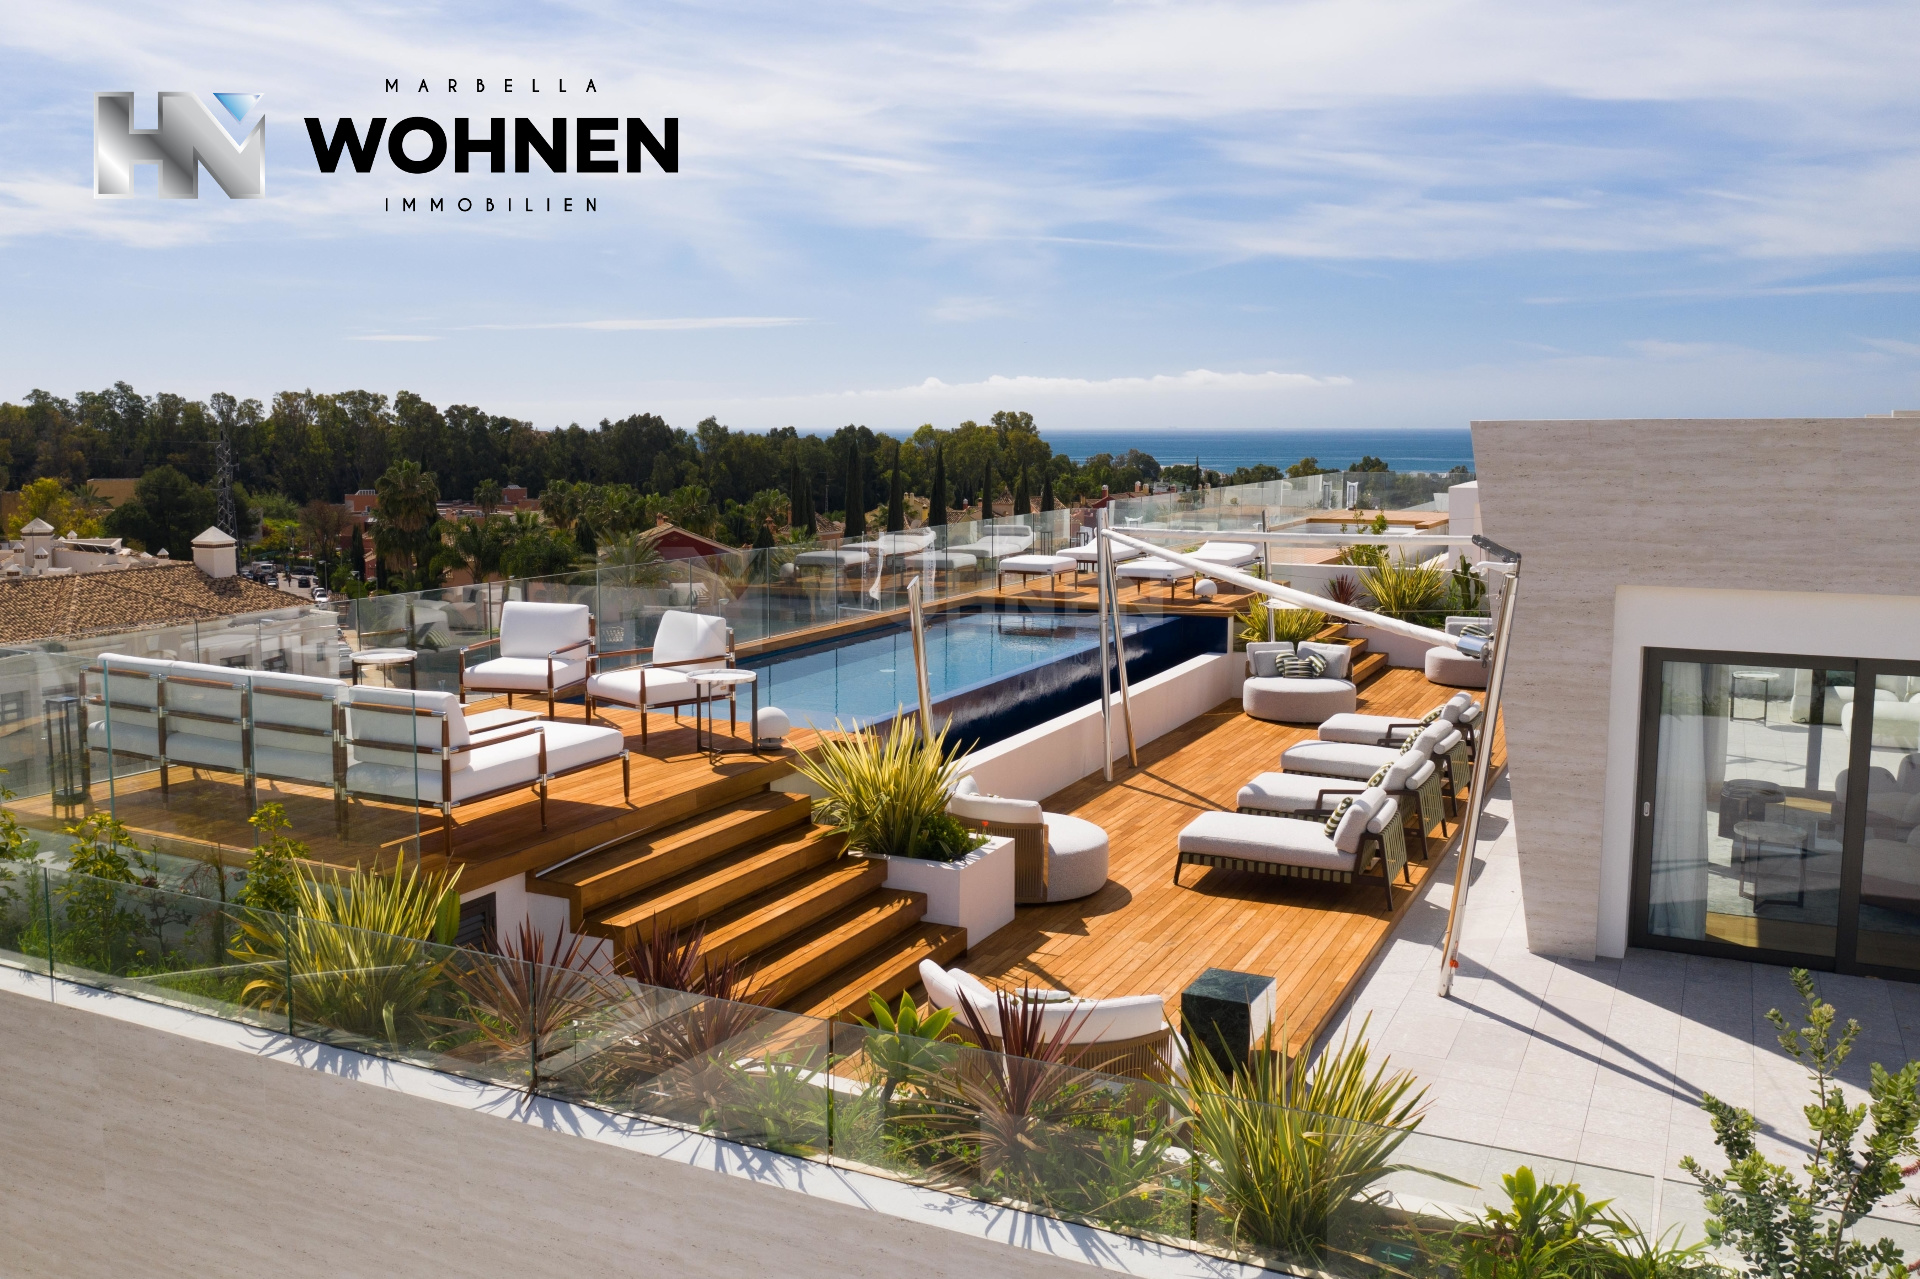 REAL ESTATE – MARBELLA WOHNEN – The best luxury homes in Spain are in Marbella